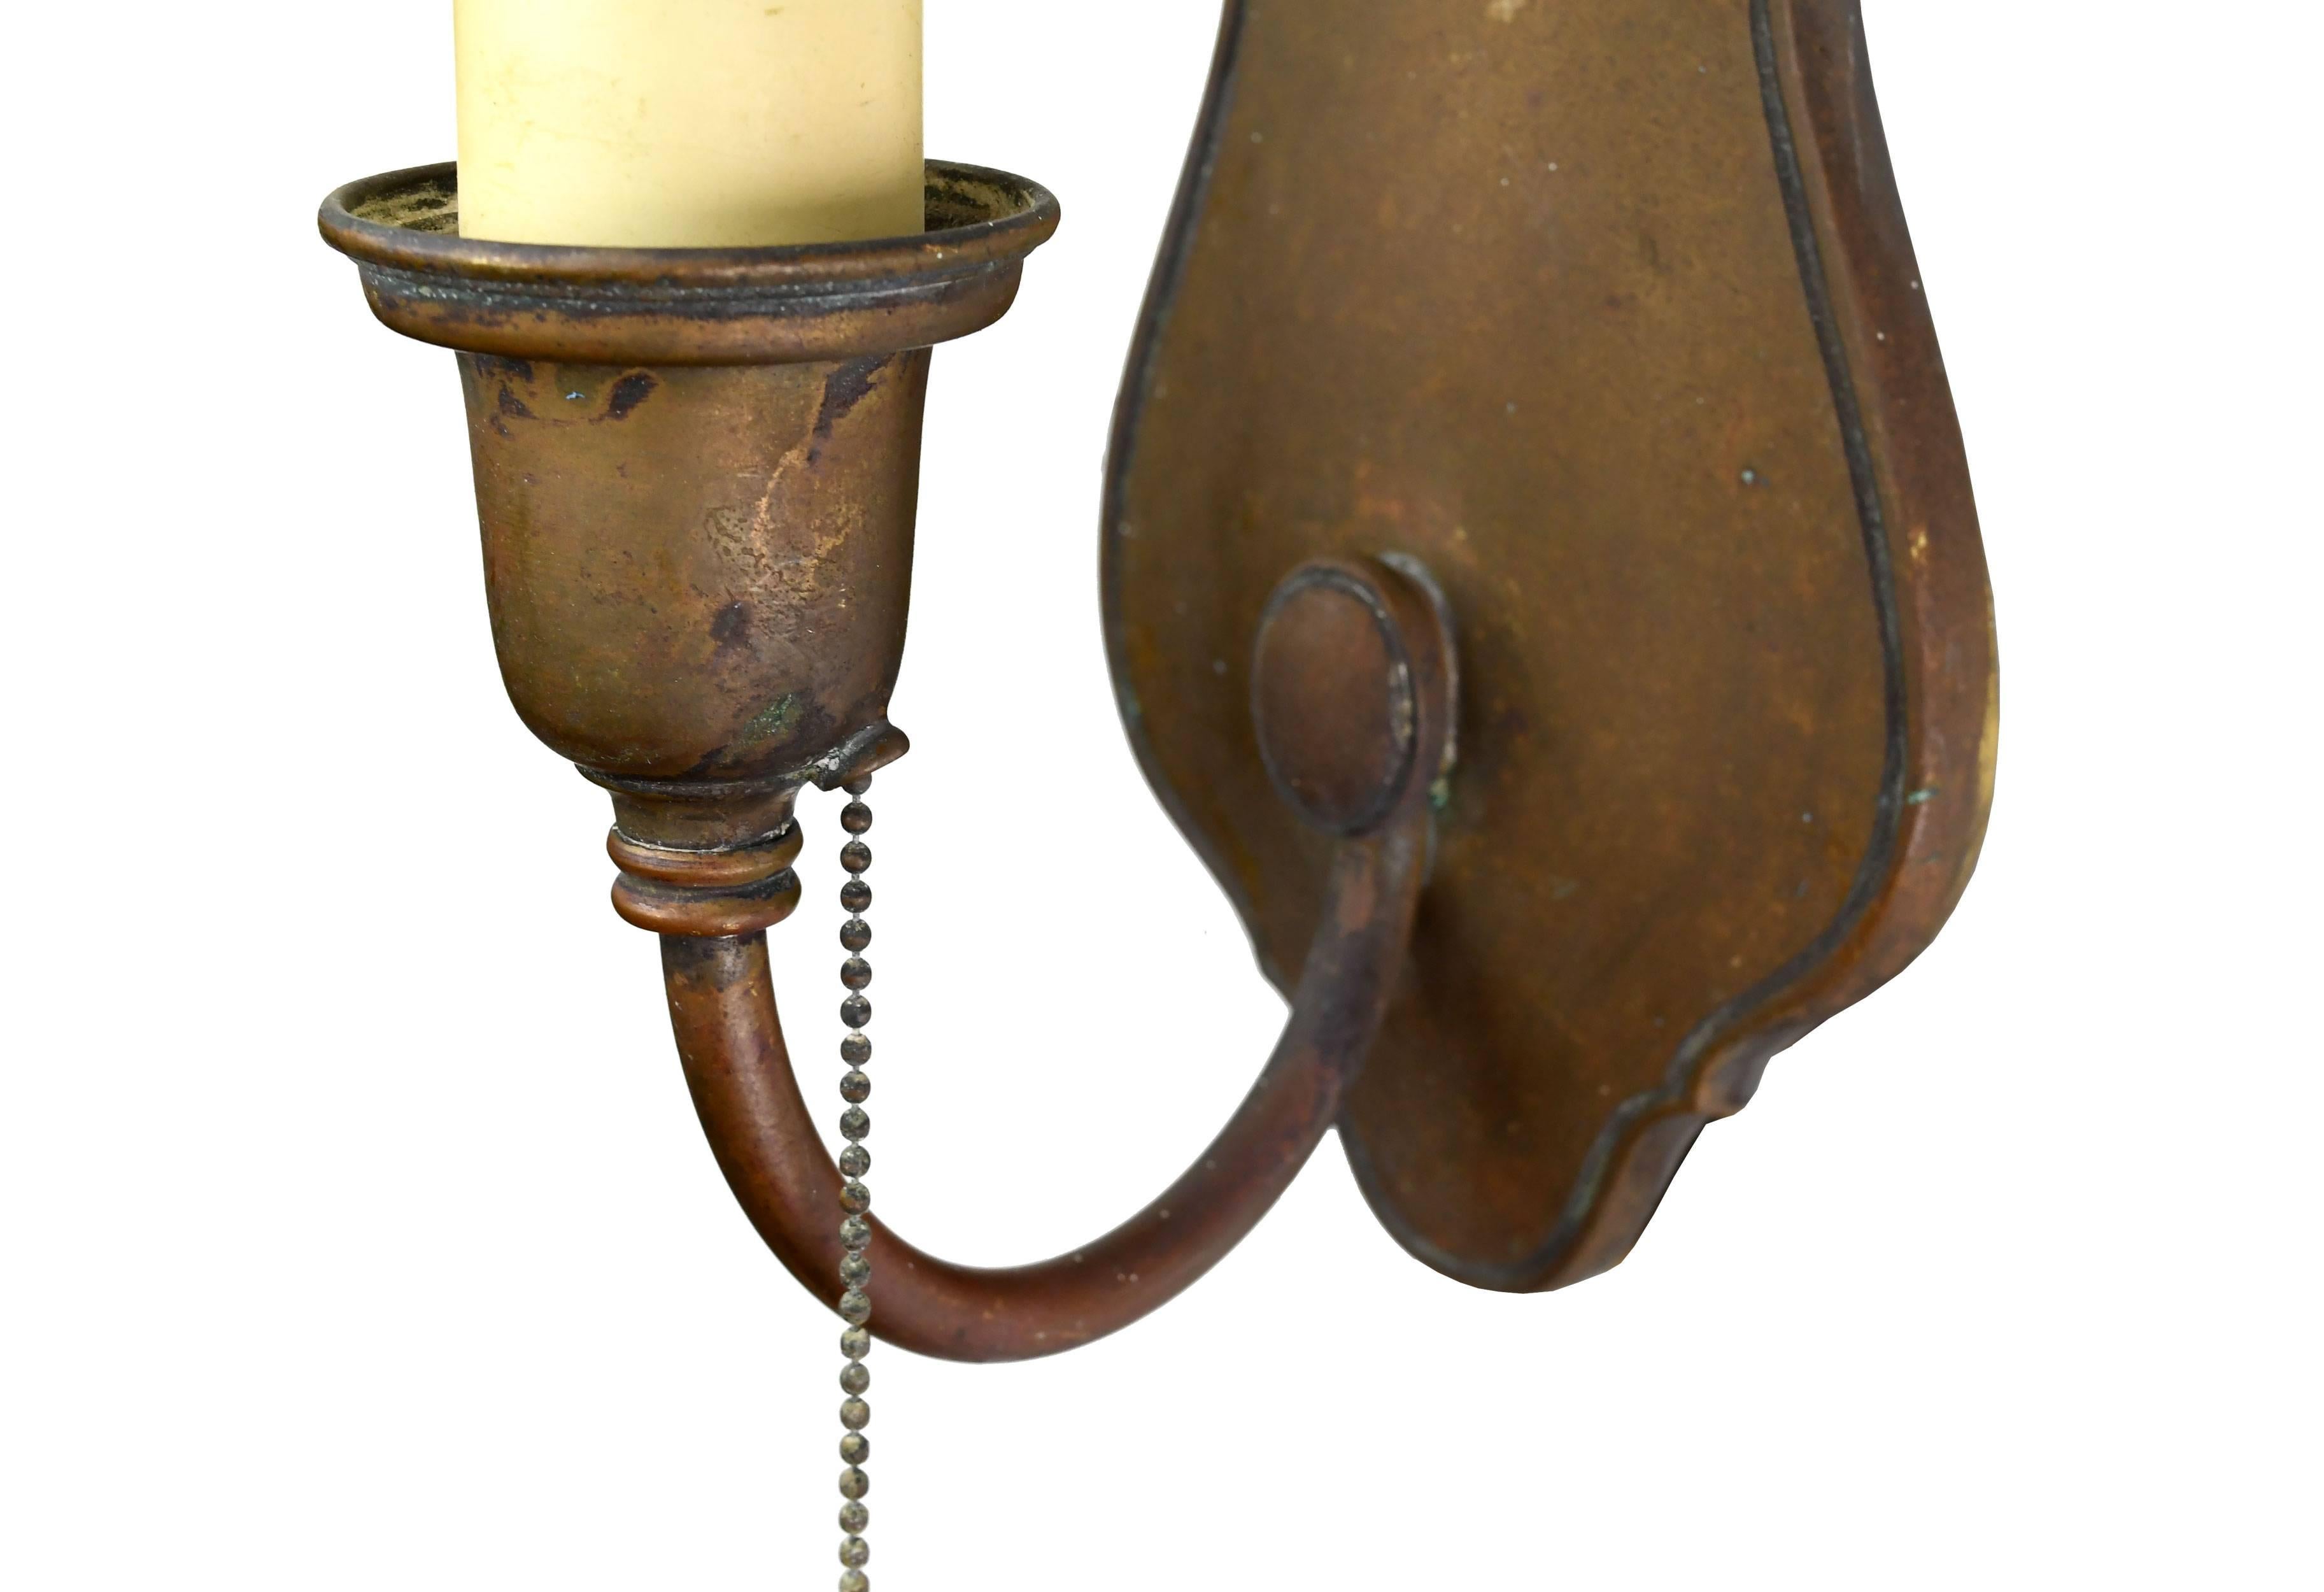 These timeless cast brass sconces are stamped 